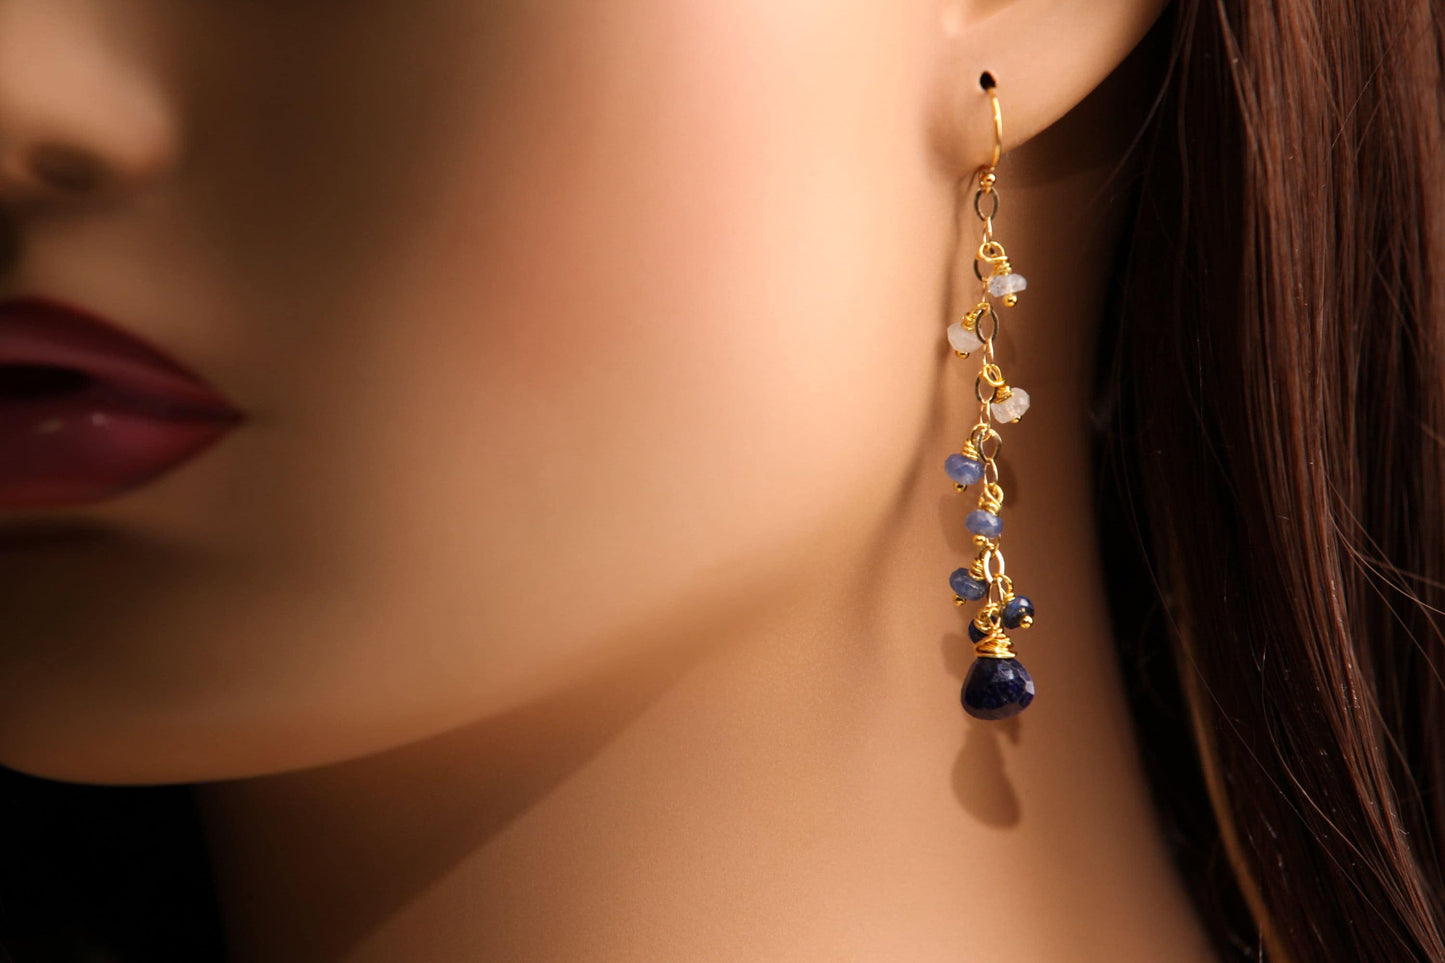 Ombre Sapphire earrings Wire Wrapped 7.5mm heart drop Dangling with 4mm faceted roundel in 14K Gold Filled hook or Leverback earwire